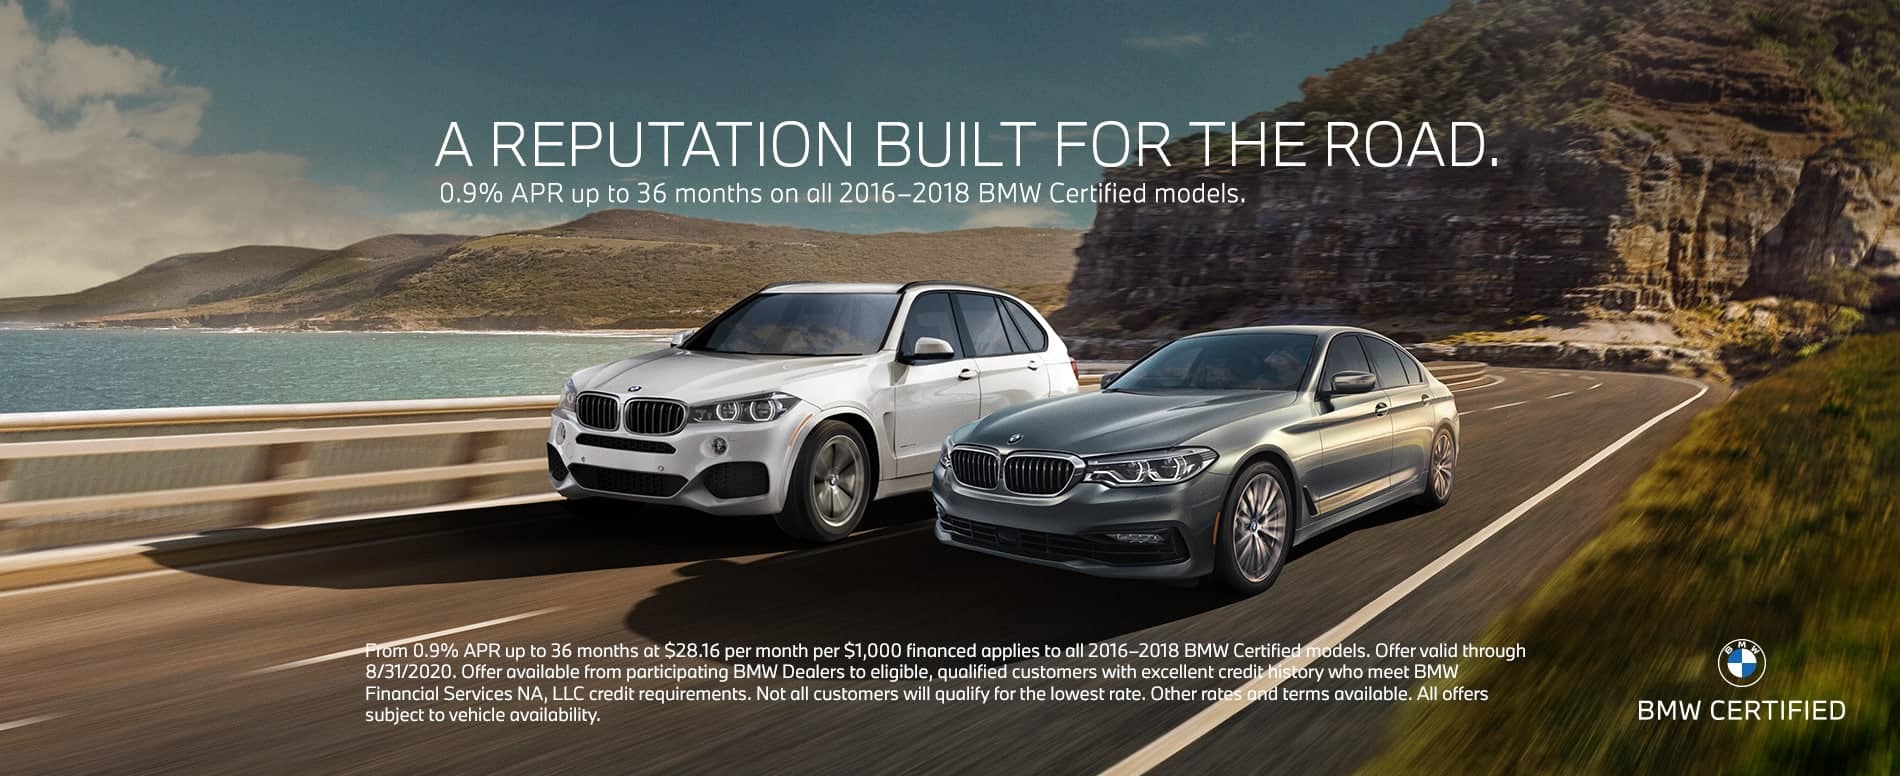 New Models Of Bmw Cars